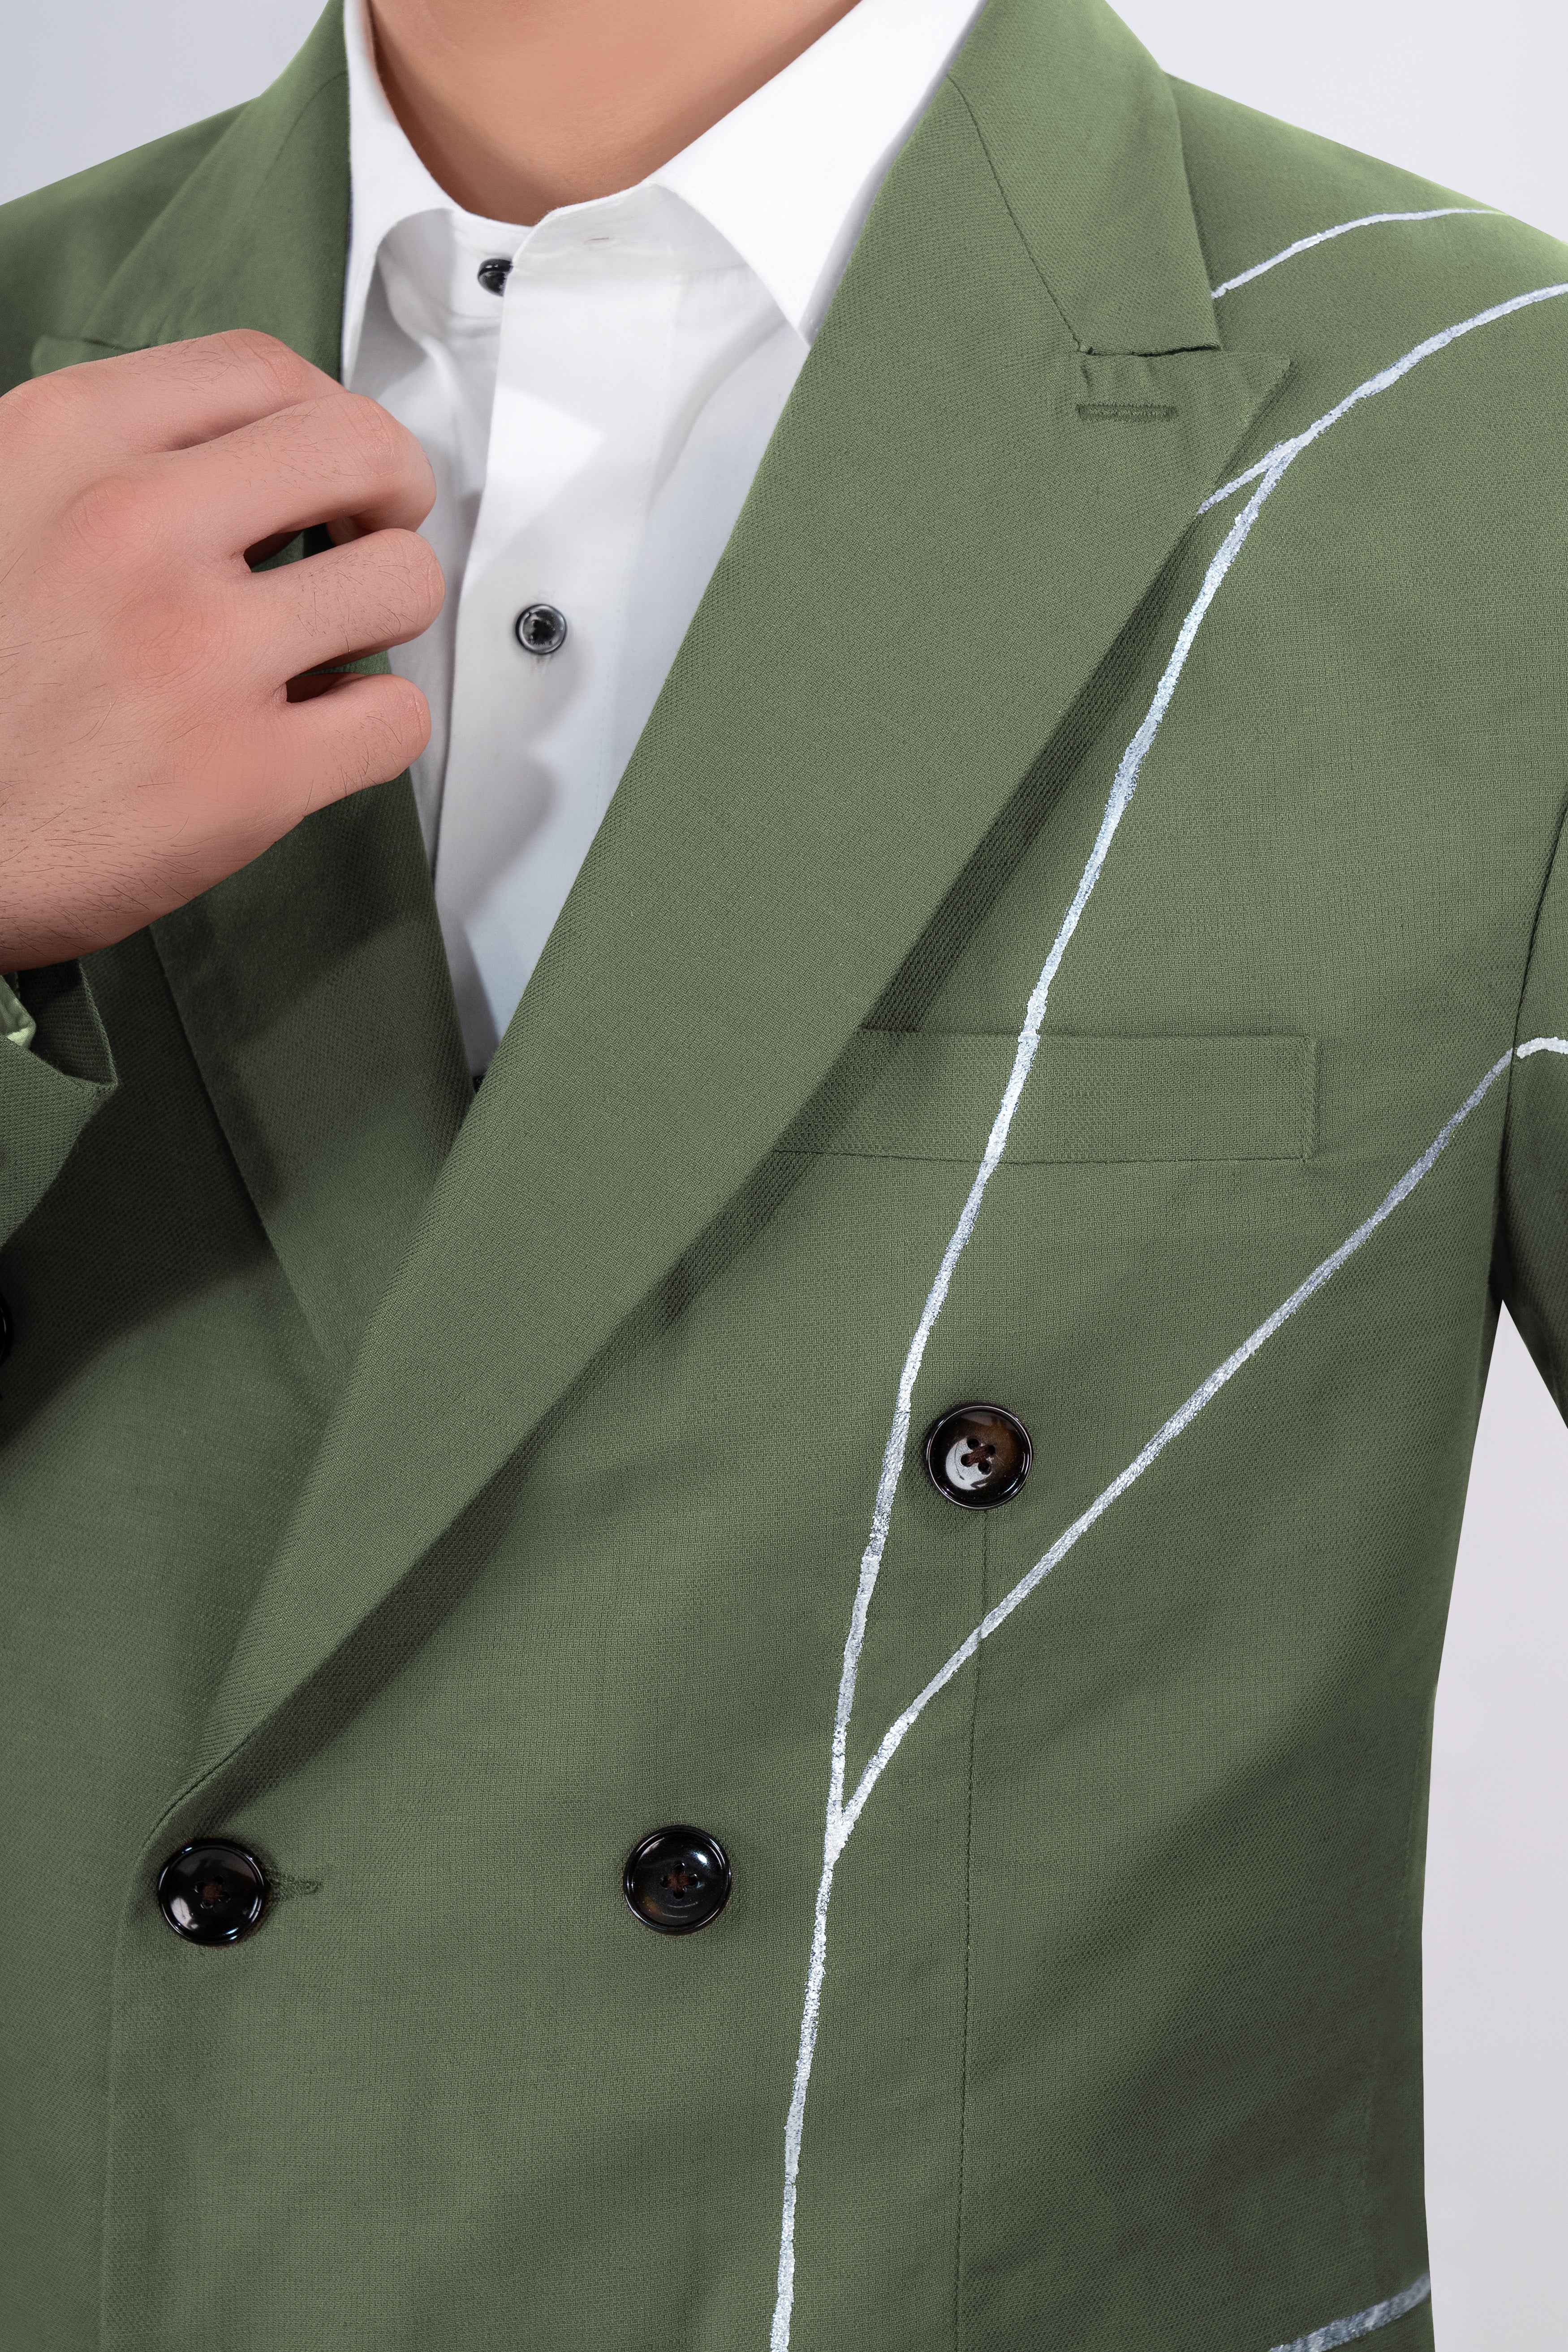 Willow Grove Green Double Breasted Hand Painted Premium Cotton Designer Suit ST918-DB-ART-36, ST918-DB-ART-38, ST918-DB-ART-40, ST918-DB-ART-42, ST918-DB-ART-44, ST918-DB-ART-46, ST918-DB-ART-48, ST918-DB-ART-50, ST918-DB-ART-52, ST918-DB-ART-54, ST918-DB-ART-56, ST918-DB-ART-58, ST918-DB-ART-60